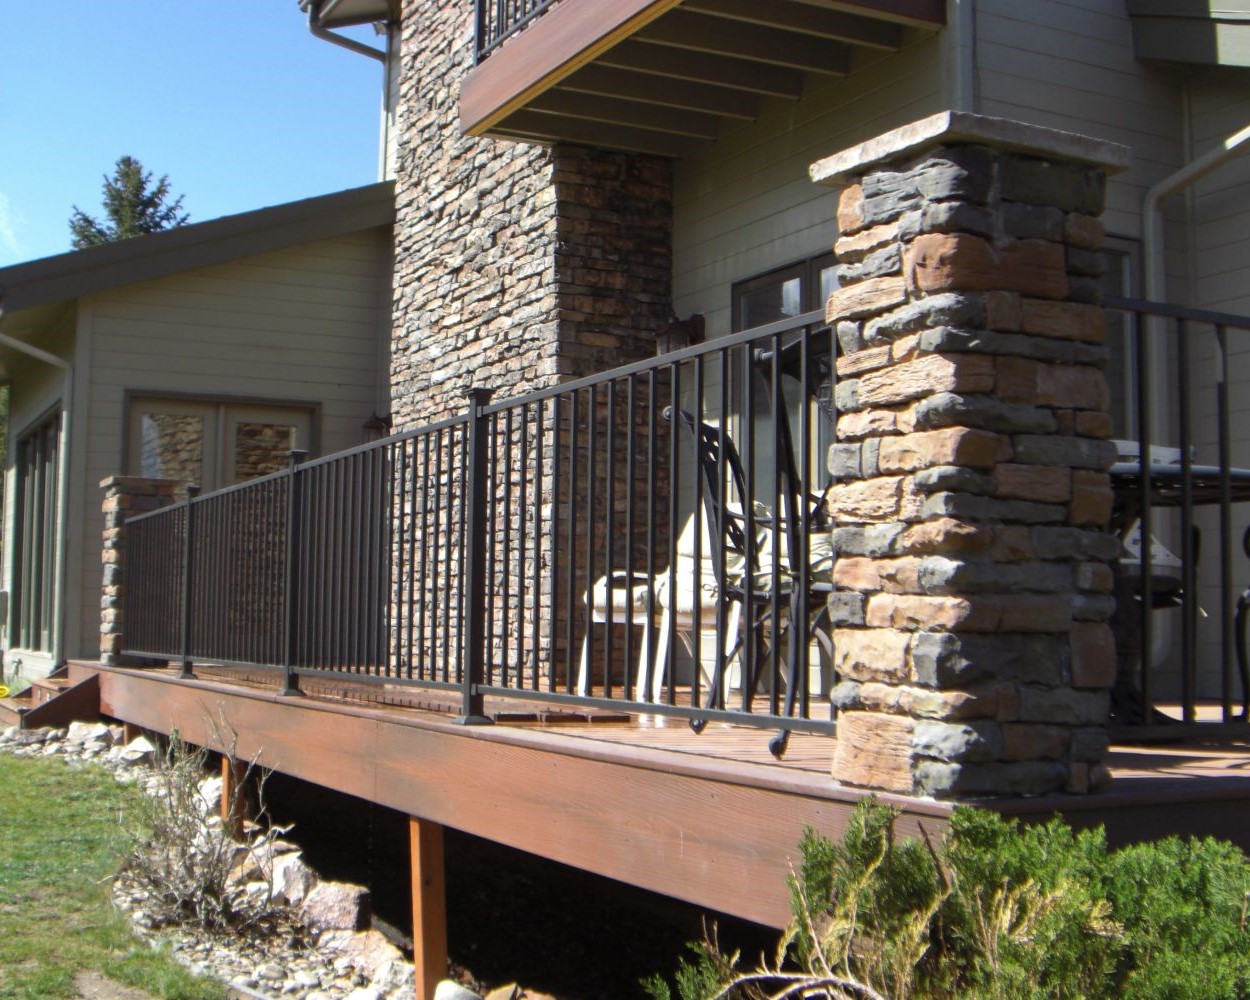 Composite deck with composite fascia installed. Black metal railing anchored by stone columns.